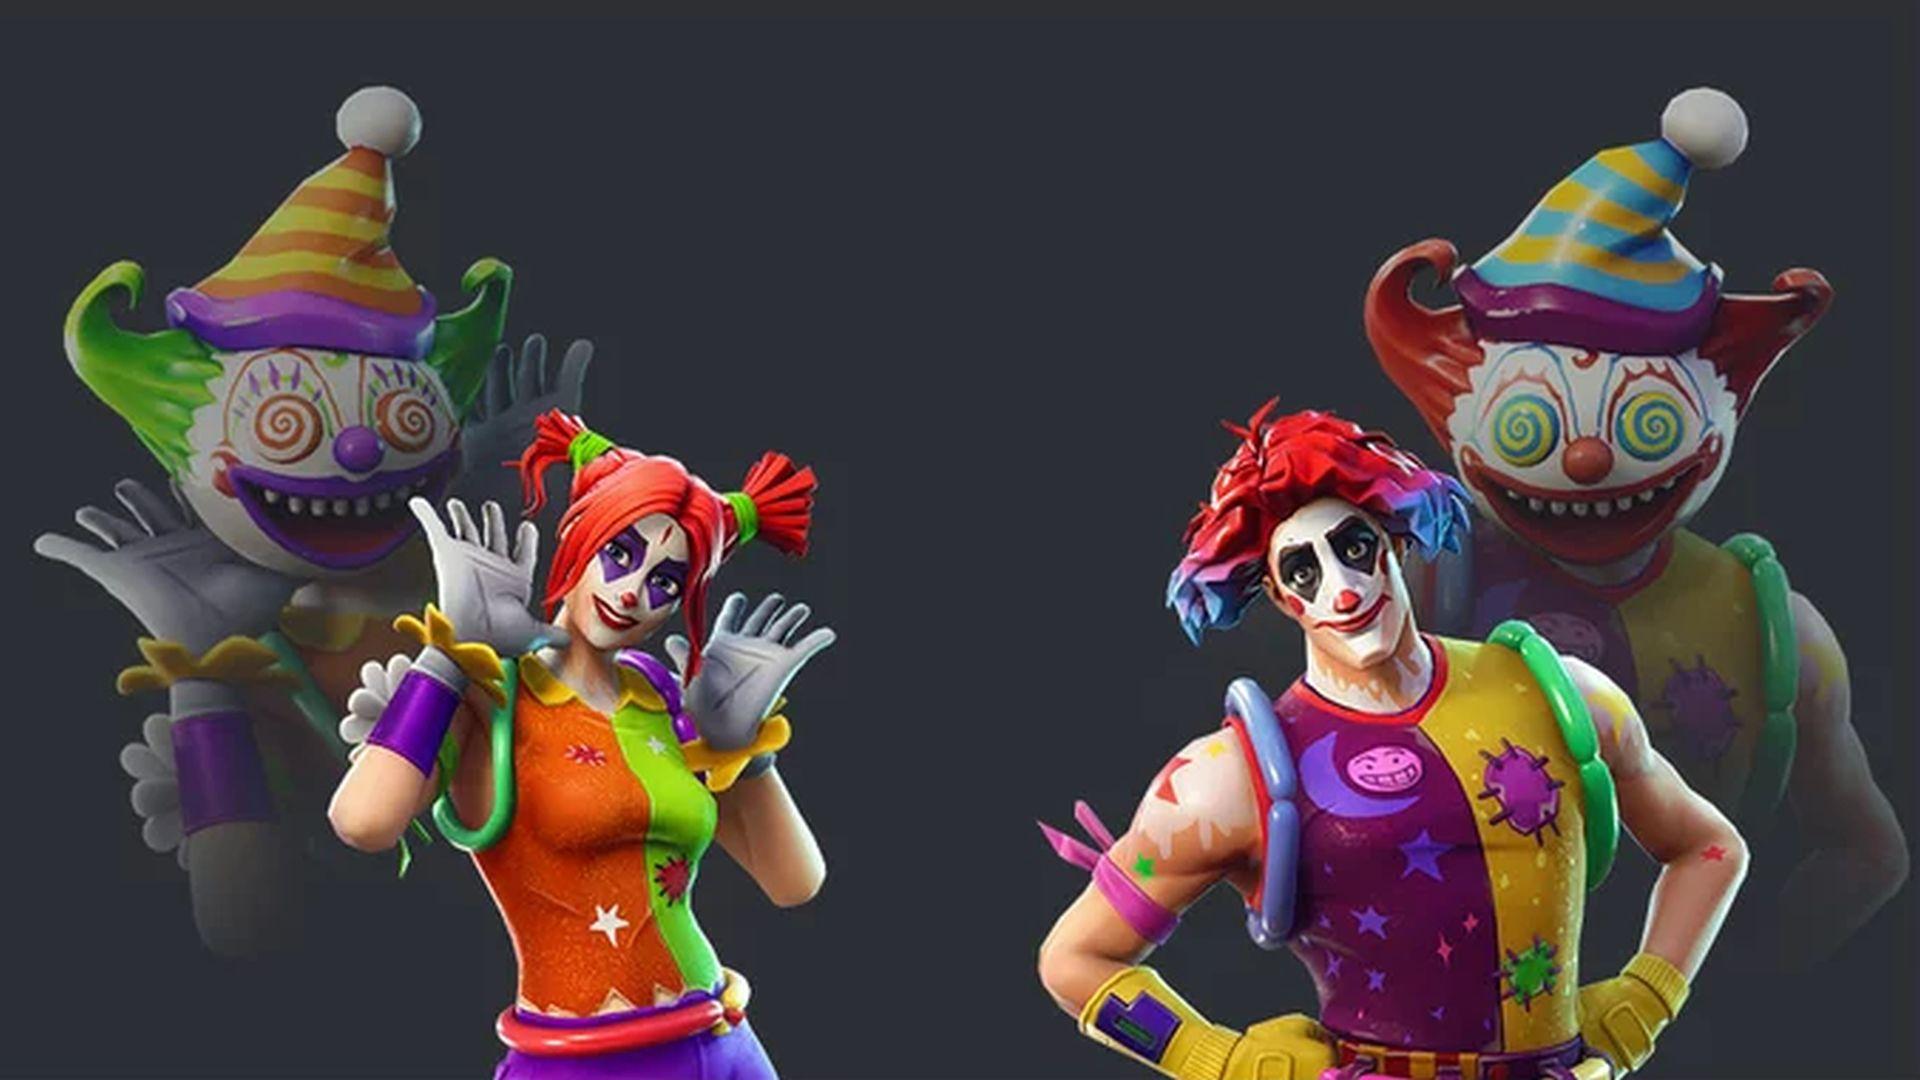 Fortnite's new blue-haired clown character - wide 1